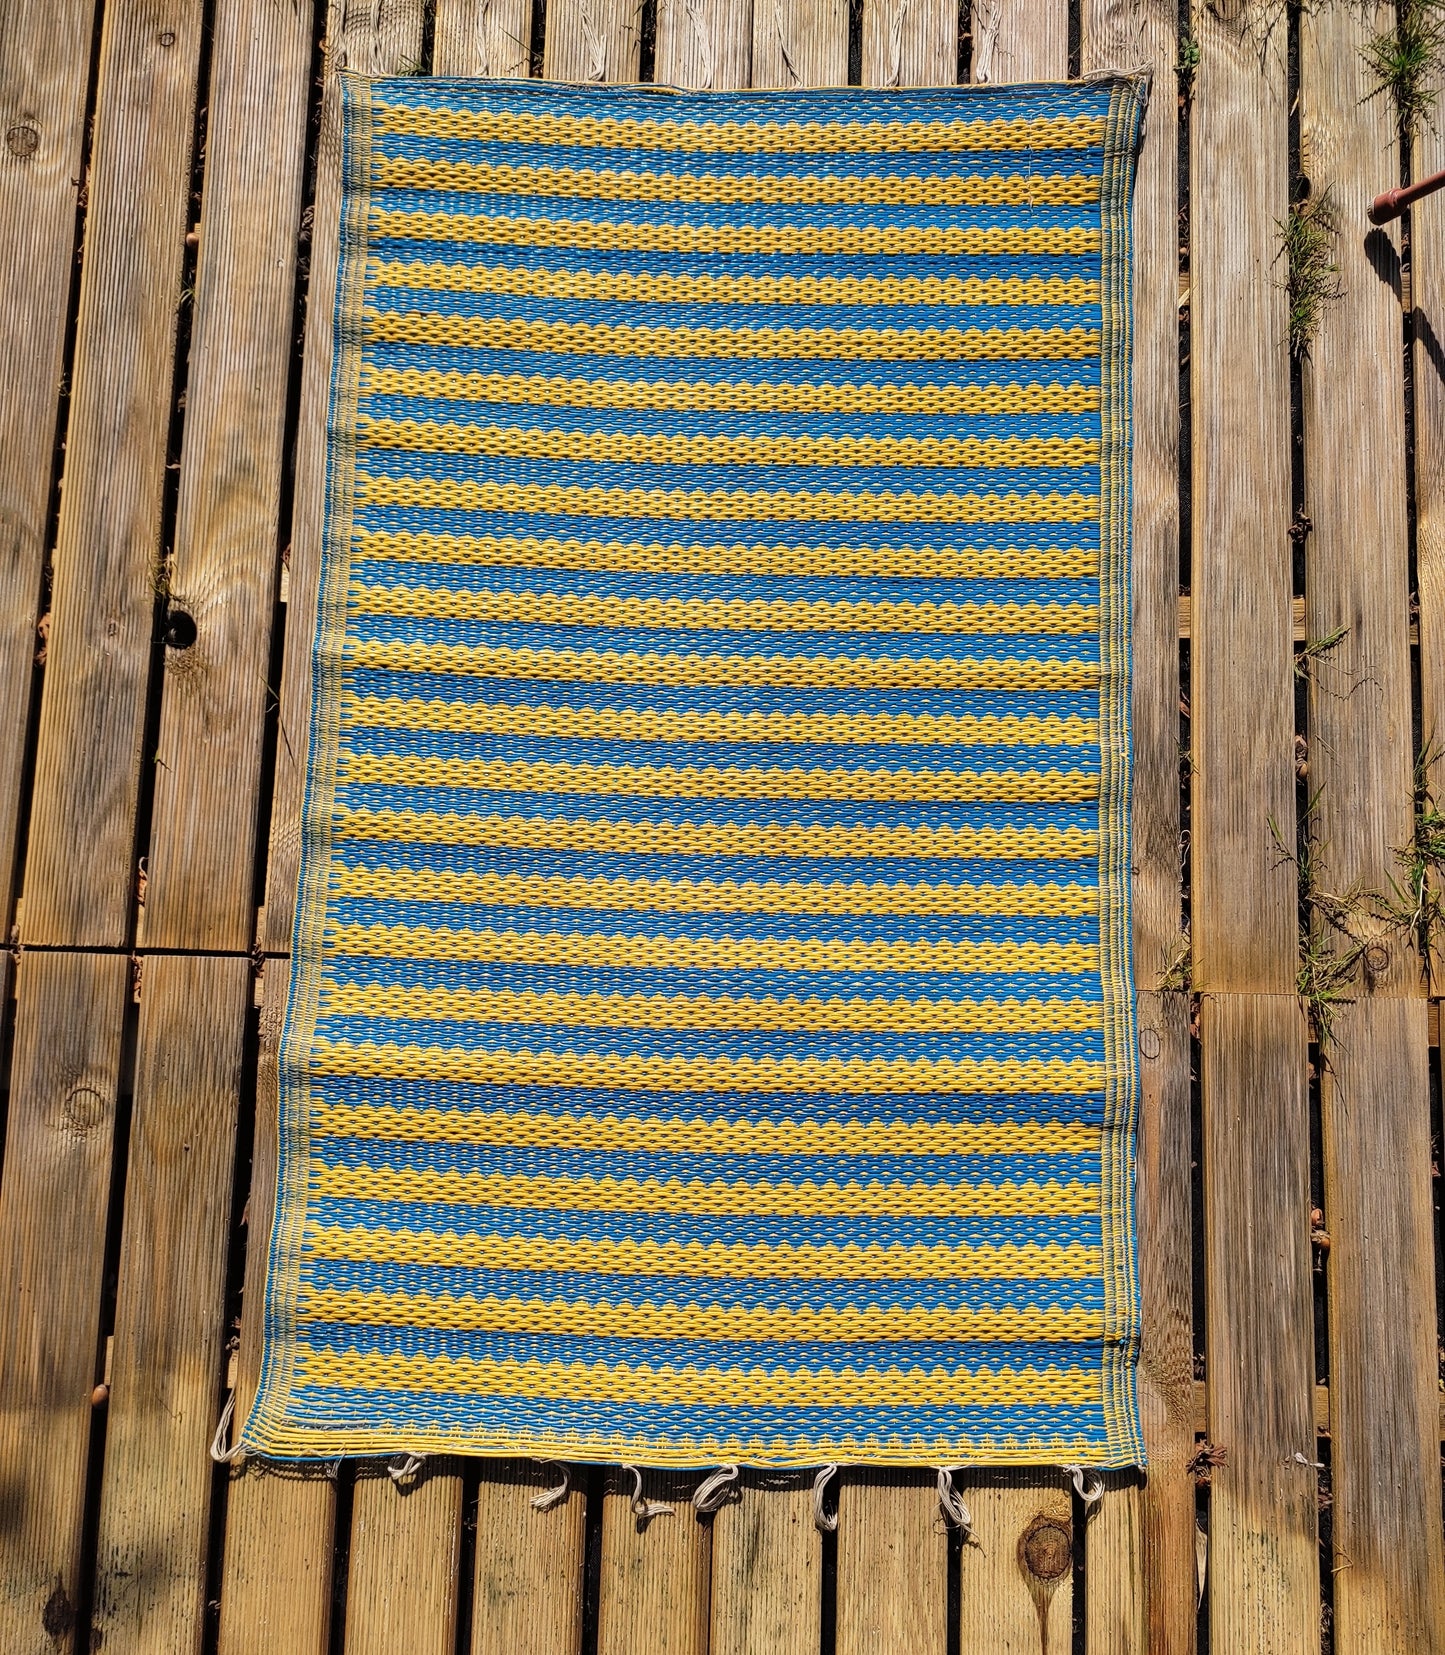 African rug made from recycled plastic